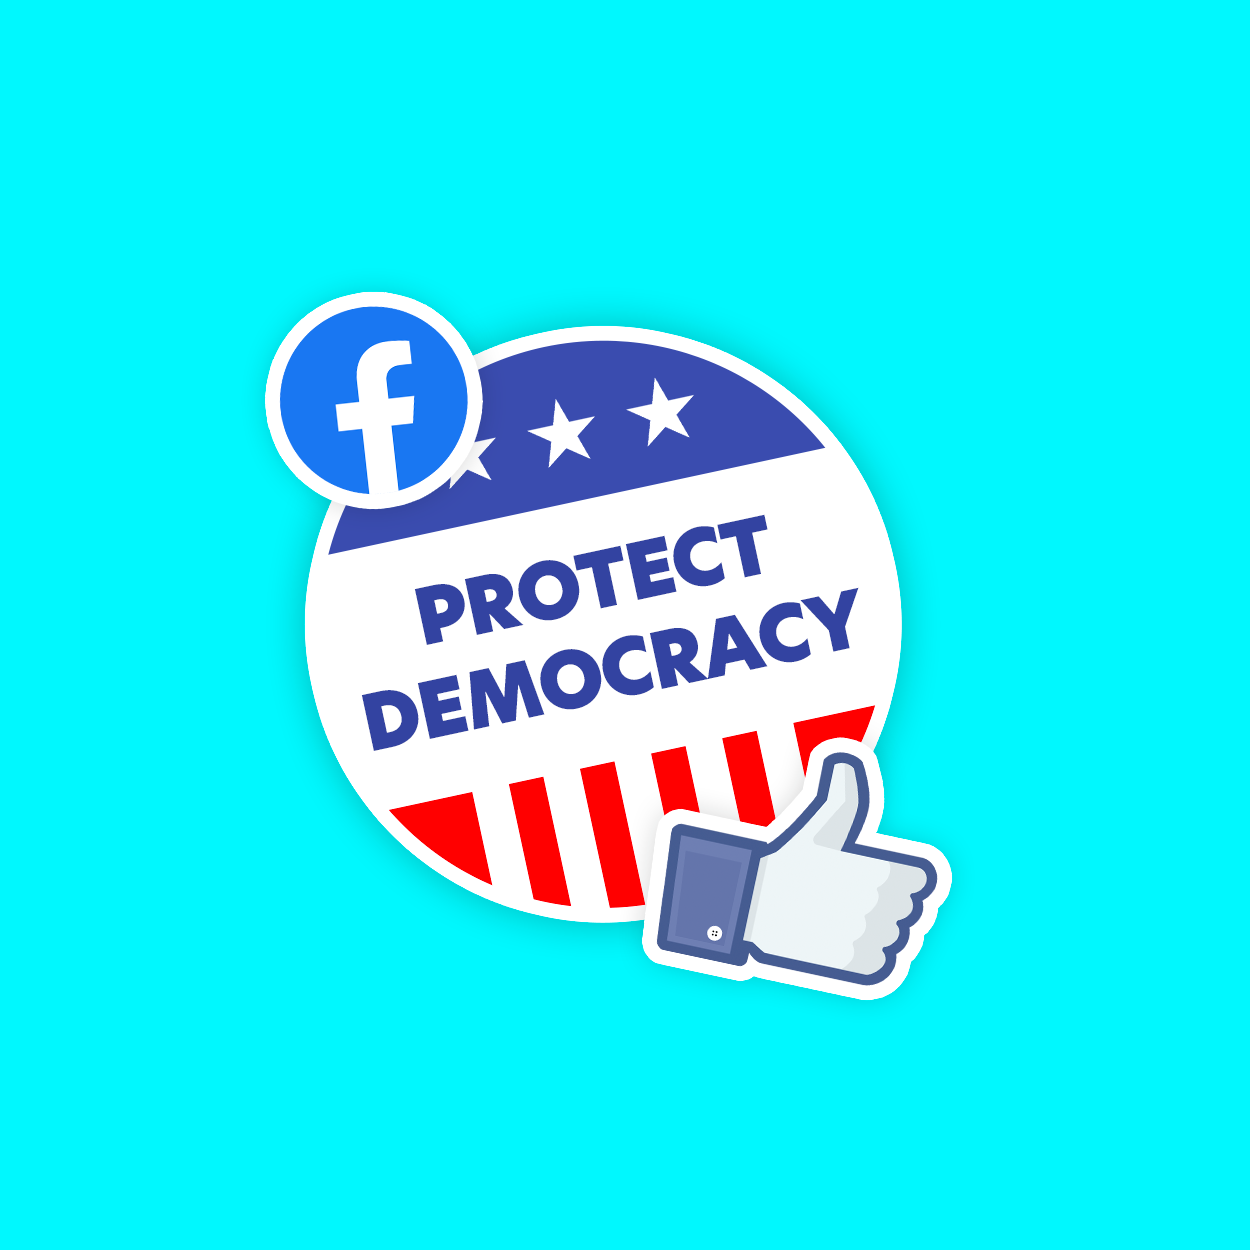 Tell Facebook to Protect Democracy